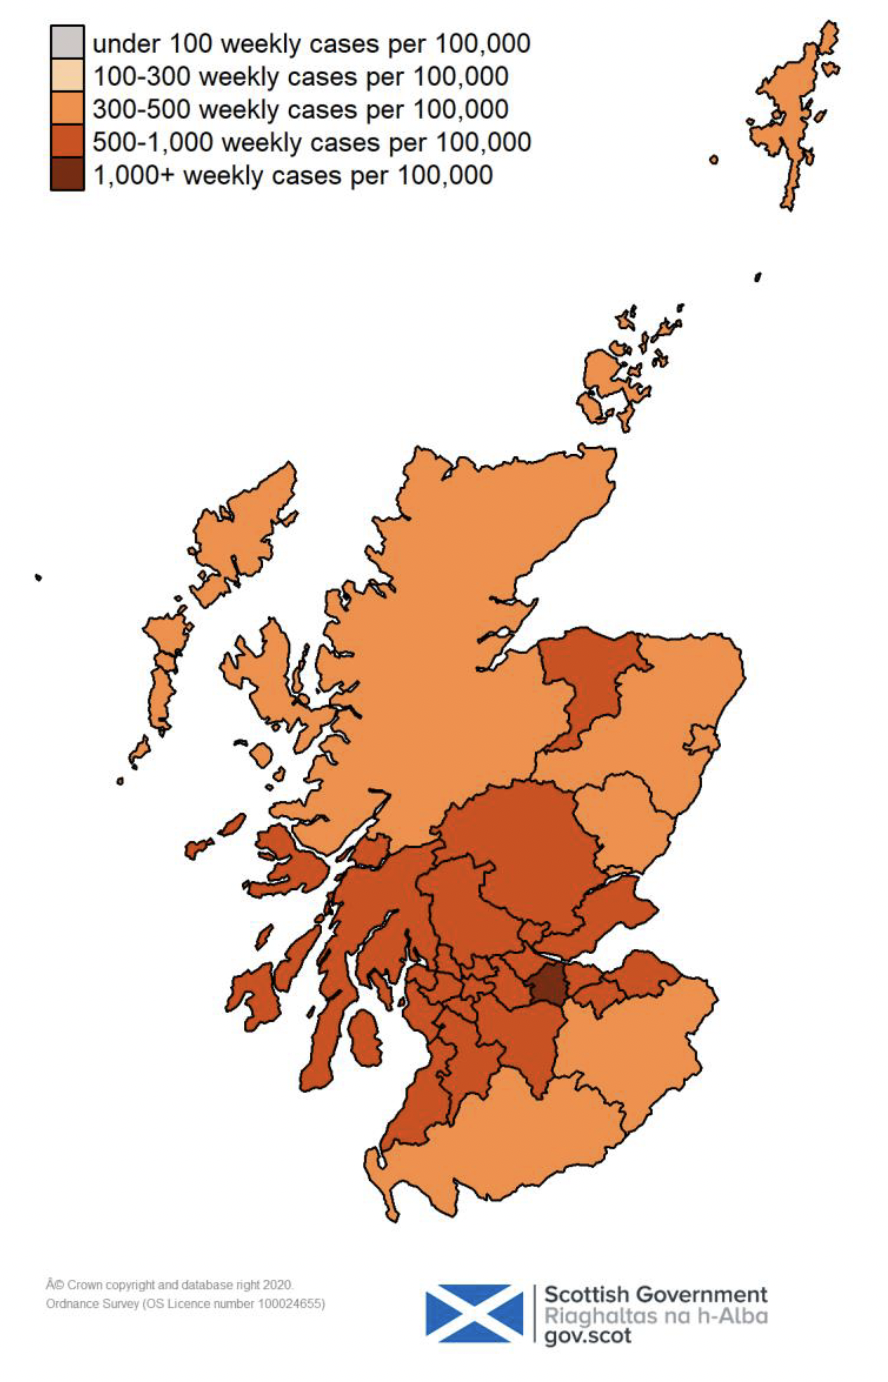 This colour coded map of Scotland shows the different rates of weekly positive cases per 100,000 people across Scotland’s Local Authorities. The colours range from grey for under 100 weekly cases per 100,000, through very light orange for 100 to 300, orange for 300 to 500, darker orange for 500 to 1,000, and very dark orange for over 1,000 weekly cases per 100,000 people. 
No local authorities are showing as grey for under 100 weekly cases per 100,000 and no local authorities are shown as very light orange, with 100-300 weekly cases per 100,000 people. Aberdeen, Aberdeenshire, Angus, Dumfries and Galloway, Dundee, Highland, Na h-Eileanan Siar, Orkney, Scottish Borders and Shetland are showing as orange with 300 to 500 weekly cases per 100,000 population. West Lothian is showing as very dark orange on the map this week, with over 1,000 weekly cases per 100,000. All other local authorities are showing as darker orange with 500 to 1,000 weekly cases per 100,000 population. 
